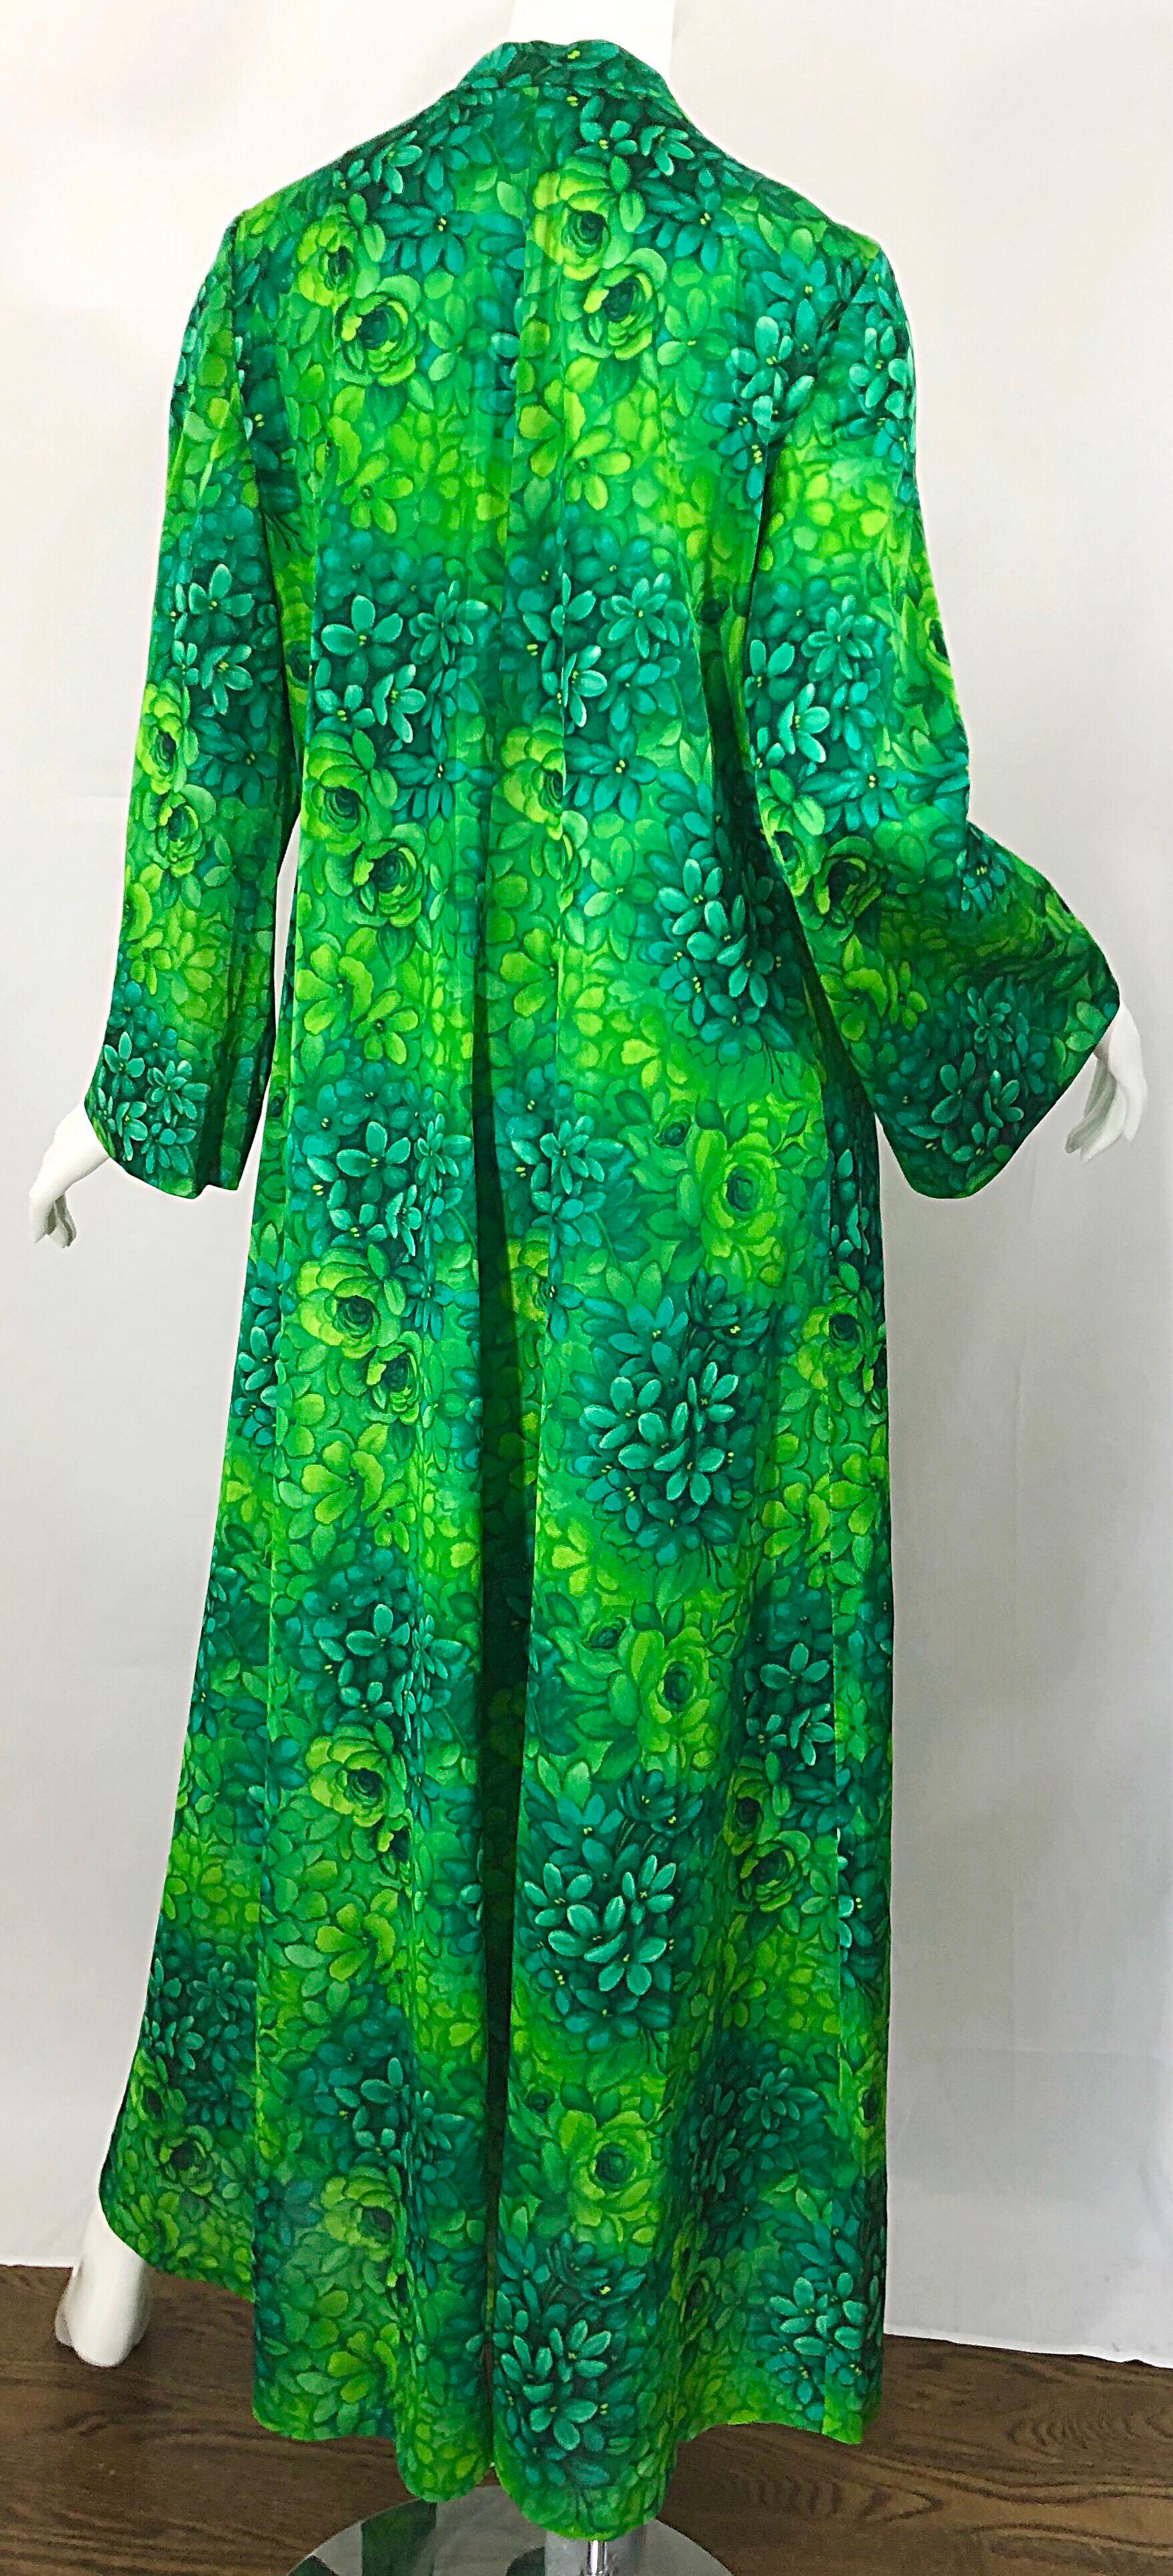 Amazing 1970s Neon + Kelly Green Abstract Flower Print 70s Vintage Caftan Dress 6